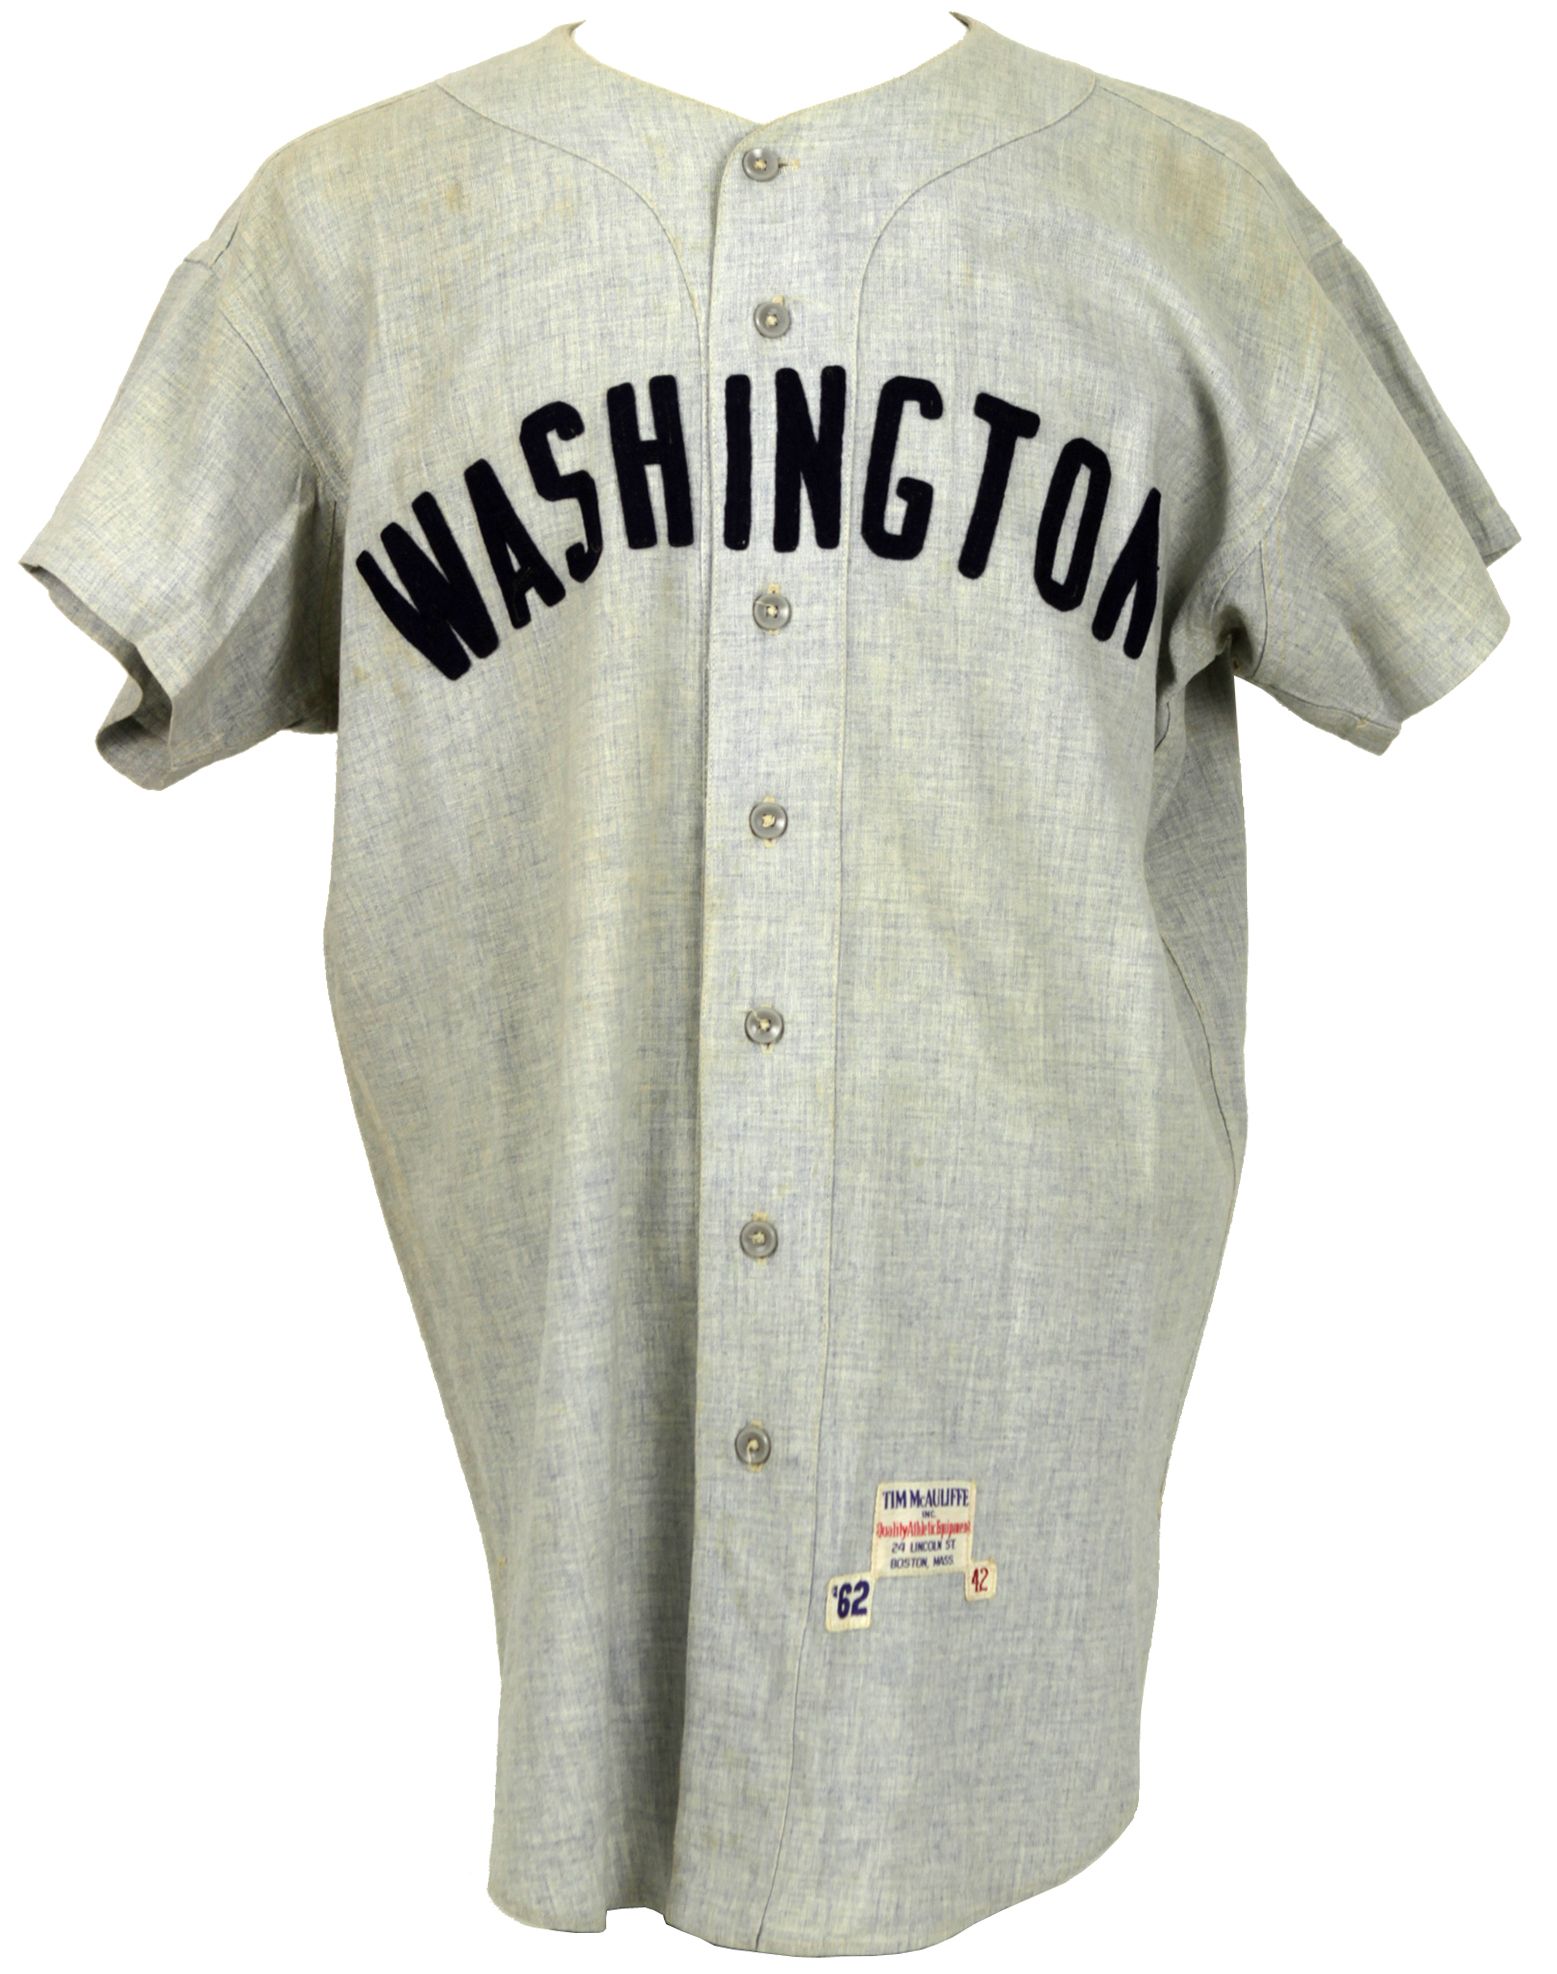 Lot Detail - 1965 Houston Astros Game Worn Jersey (MEARS A5)